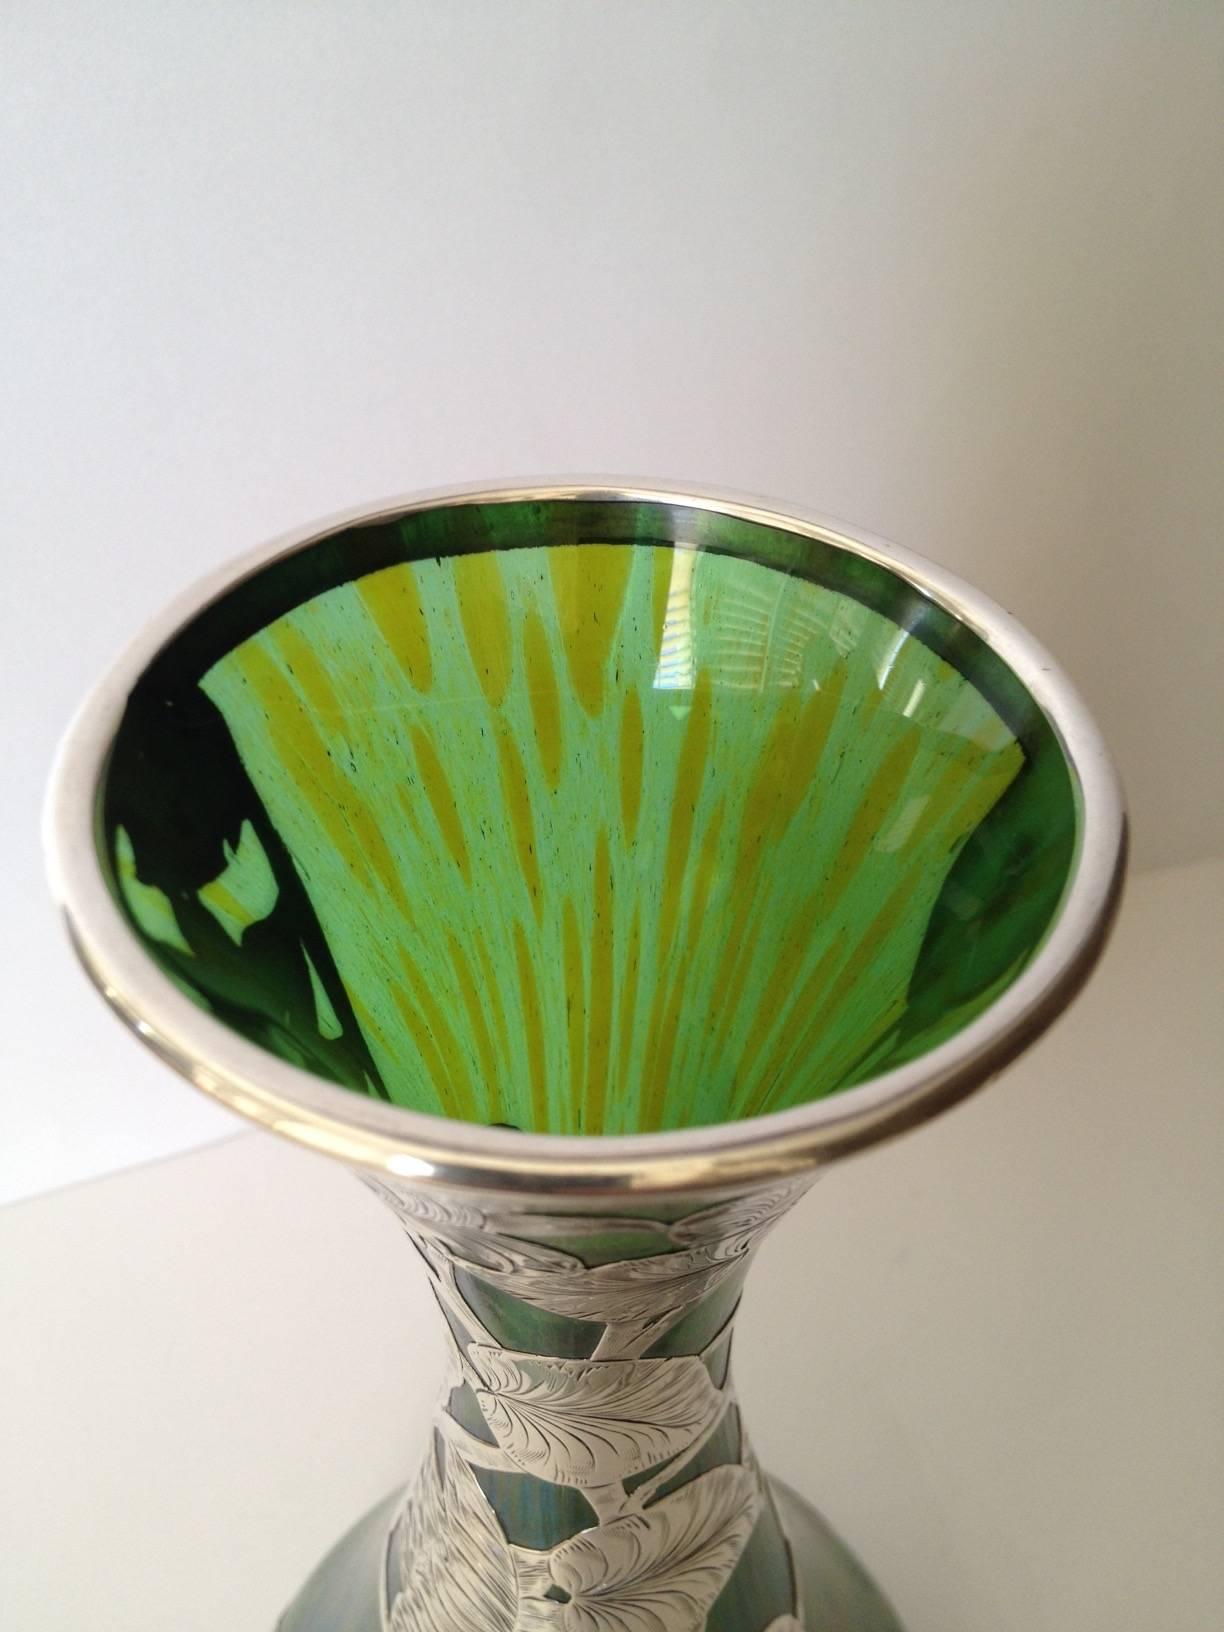 A large and awesomely beautiful Loetz art glass vase
with sterling silver overlay by Alvin Silver Co. The Art
Nouveau vase with the iridescent finish mastered at the Loetz Factory combined with the silver Work by Alvin which is chased expertly. In